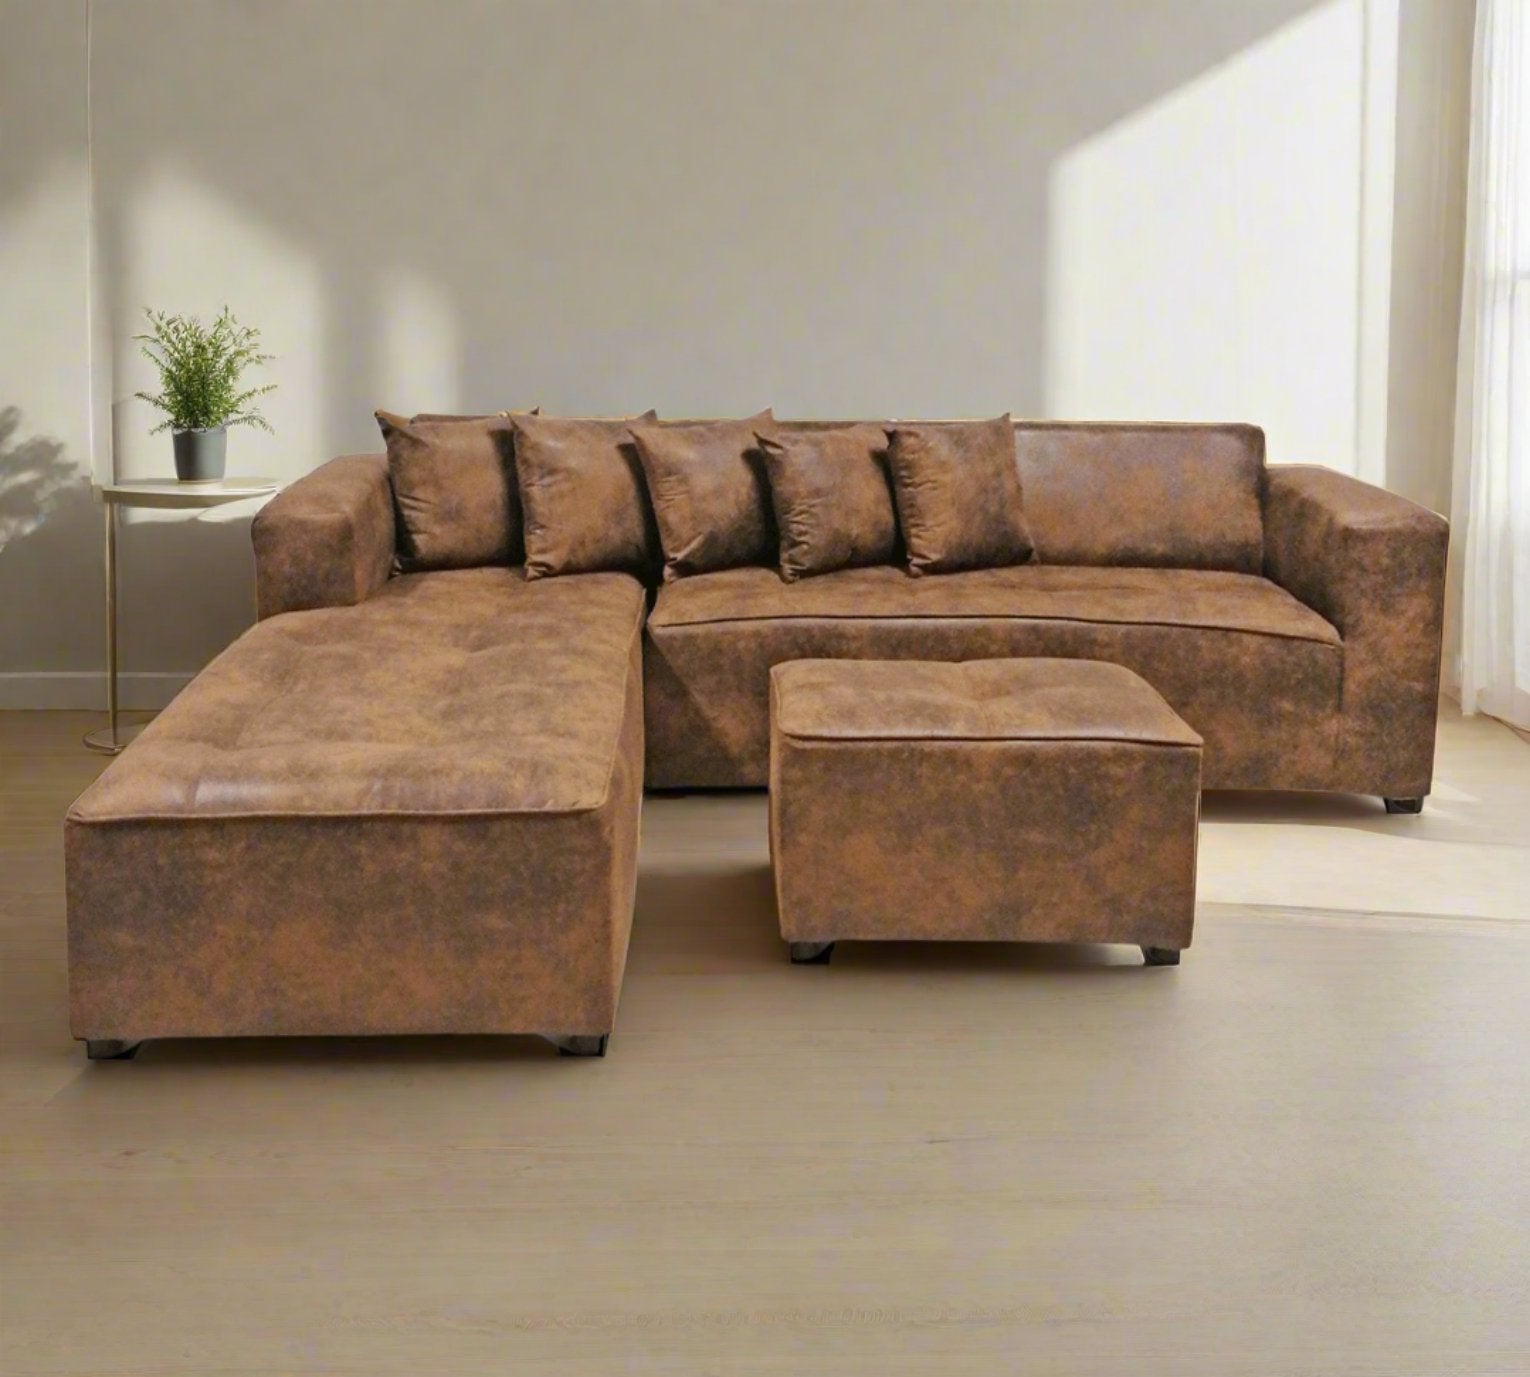 Bongi Corner Couch - That Couch Place